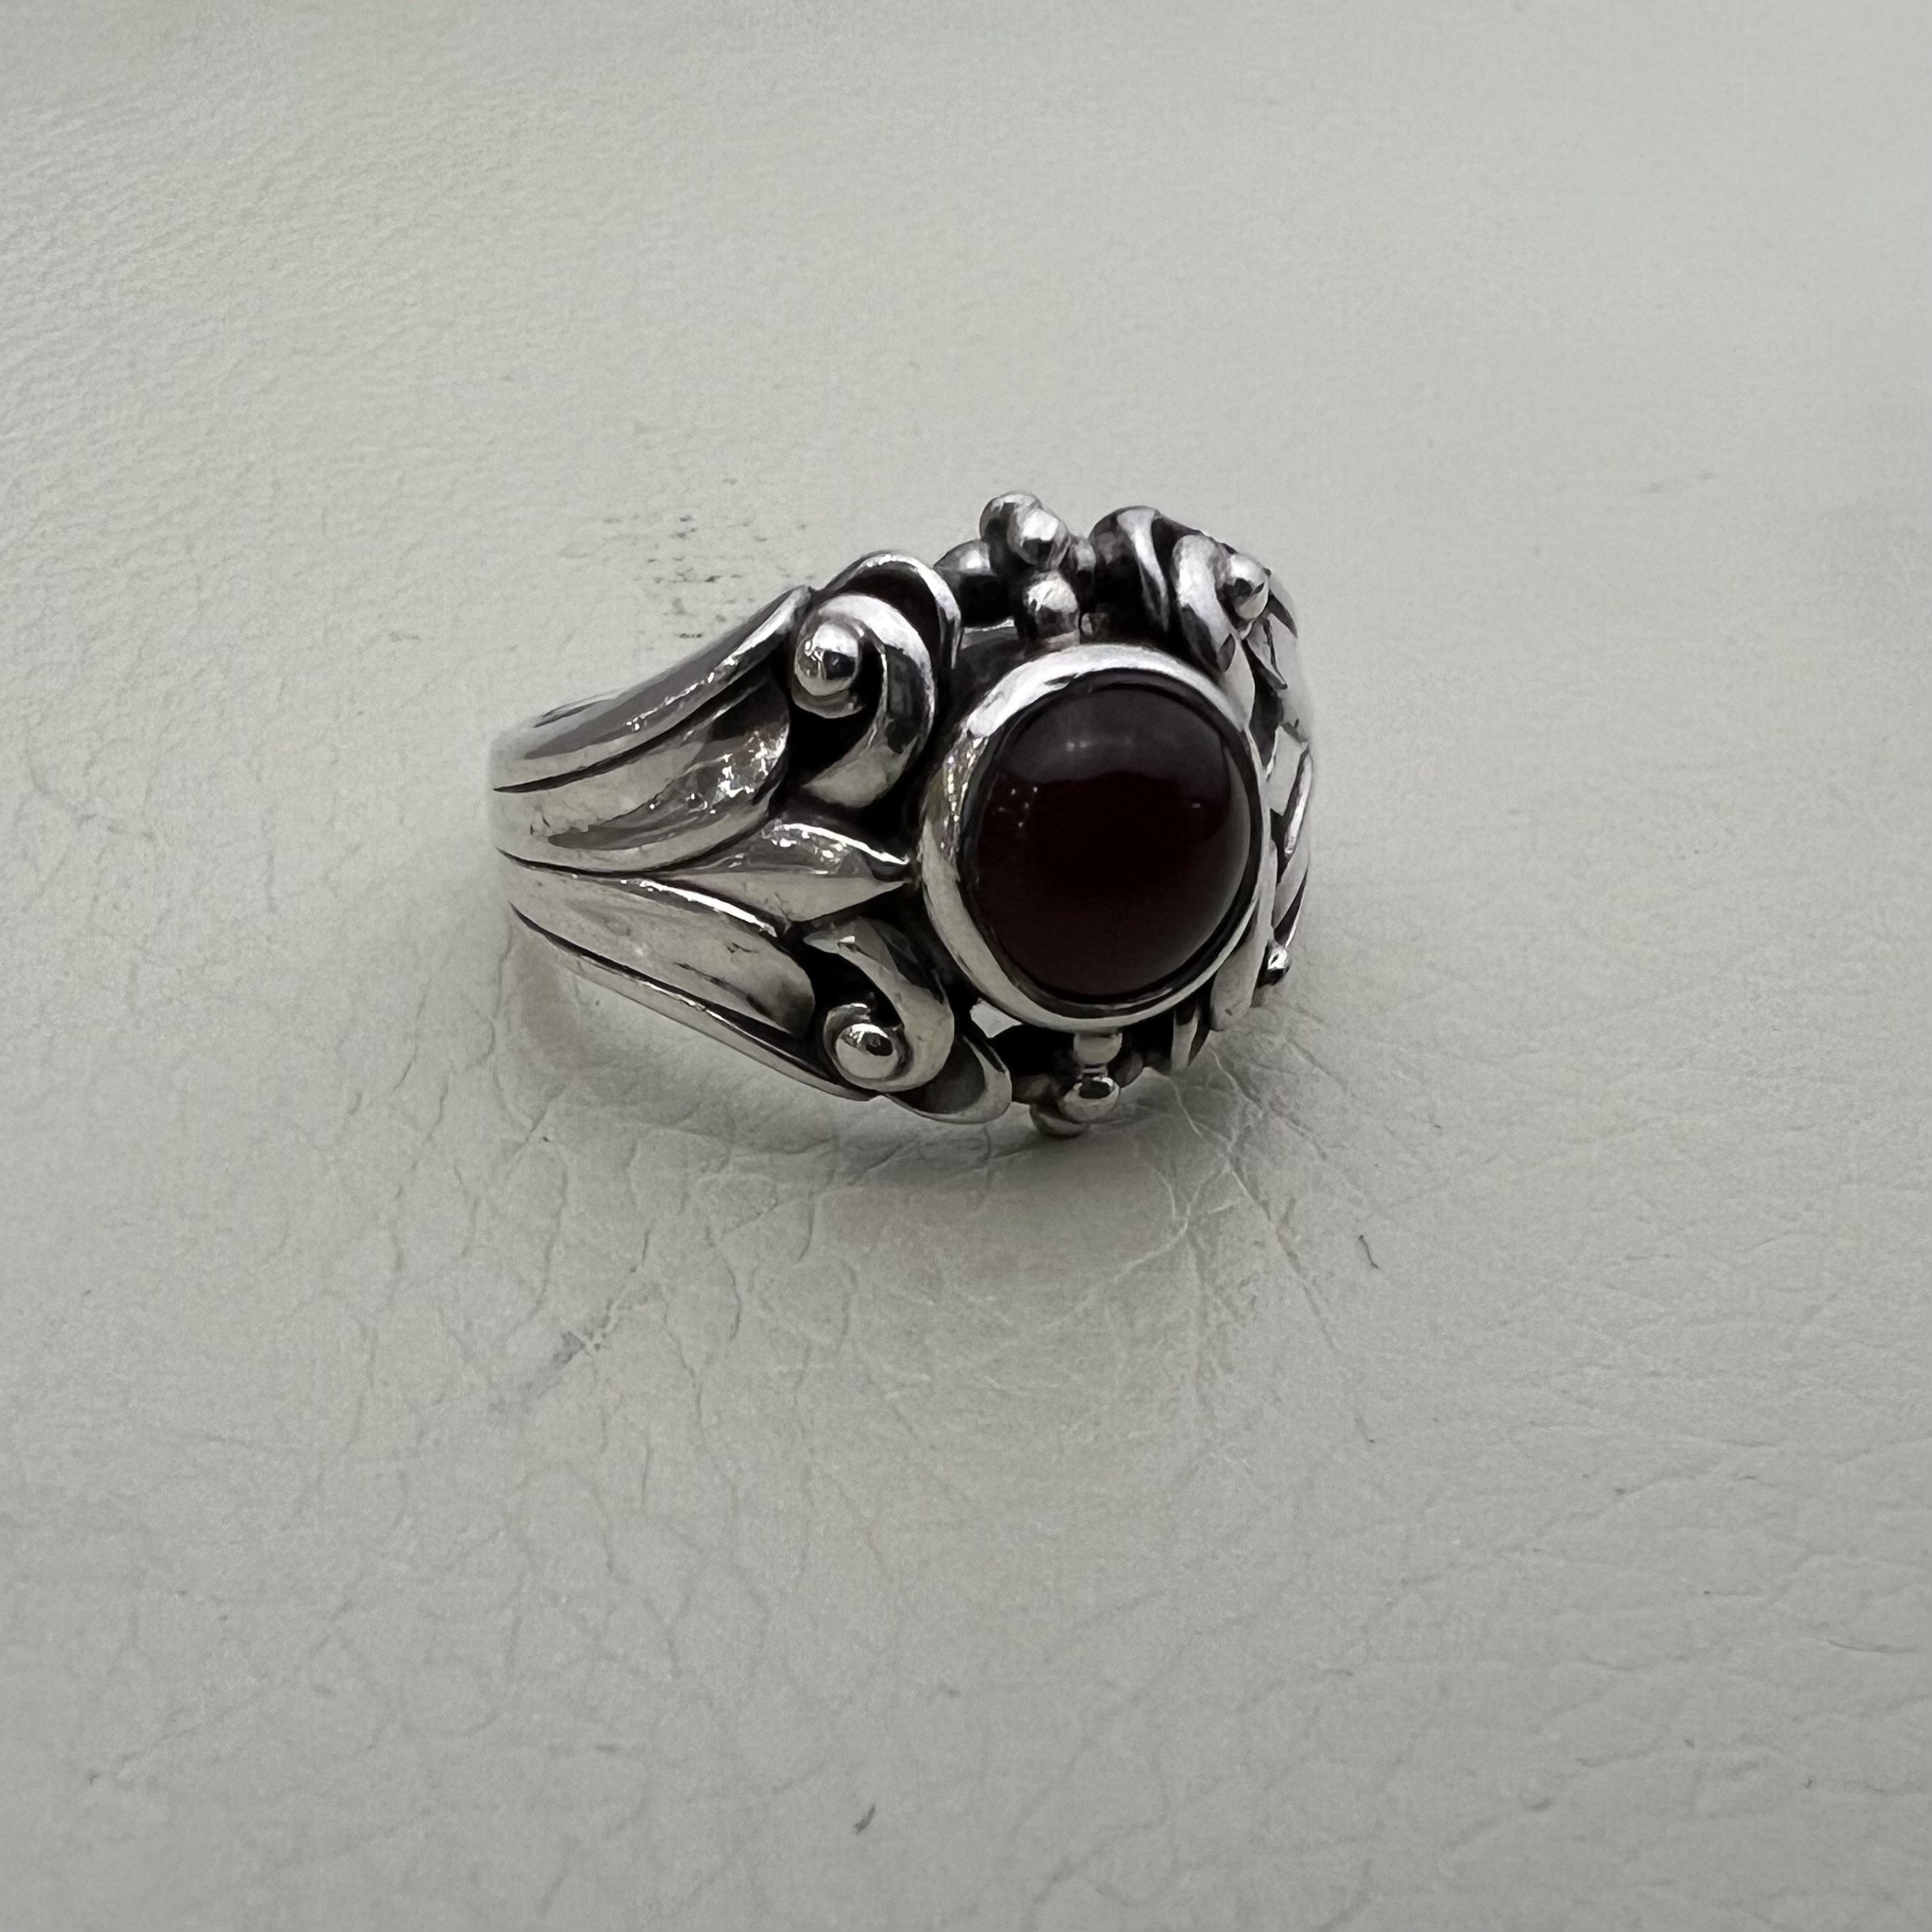 Amazon.com: Foxtail Chain Design 925 Sterling Silver Garnet Stone Men's Ring,  Handmade Silver Ring for Men, Red Garnet Stone Ring, Man Silver Garnet Stone  Ring : Handmade Products